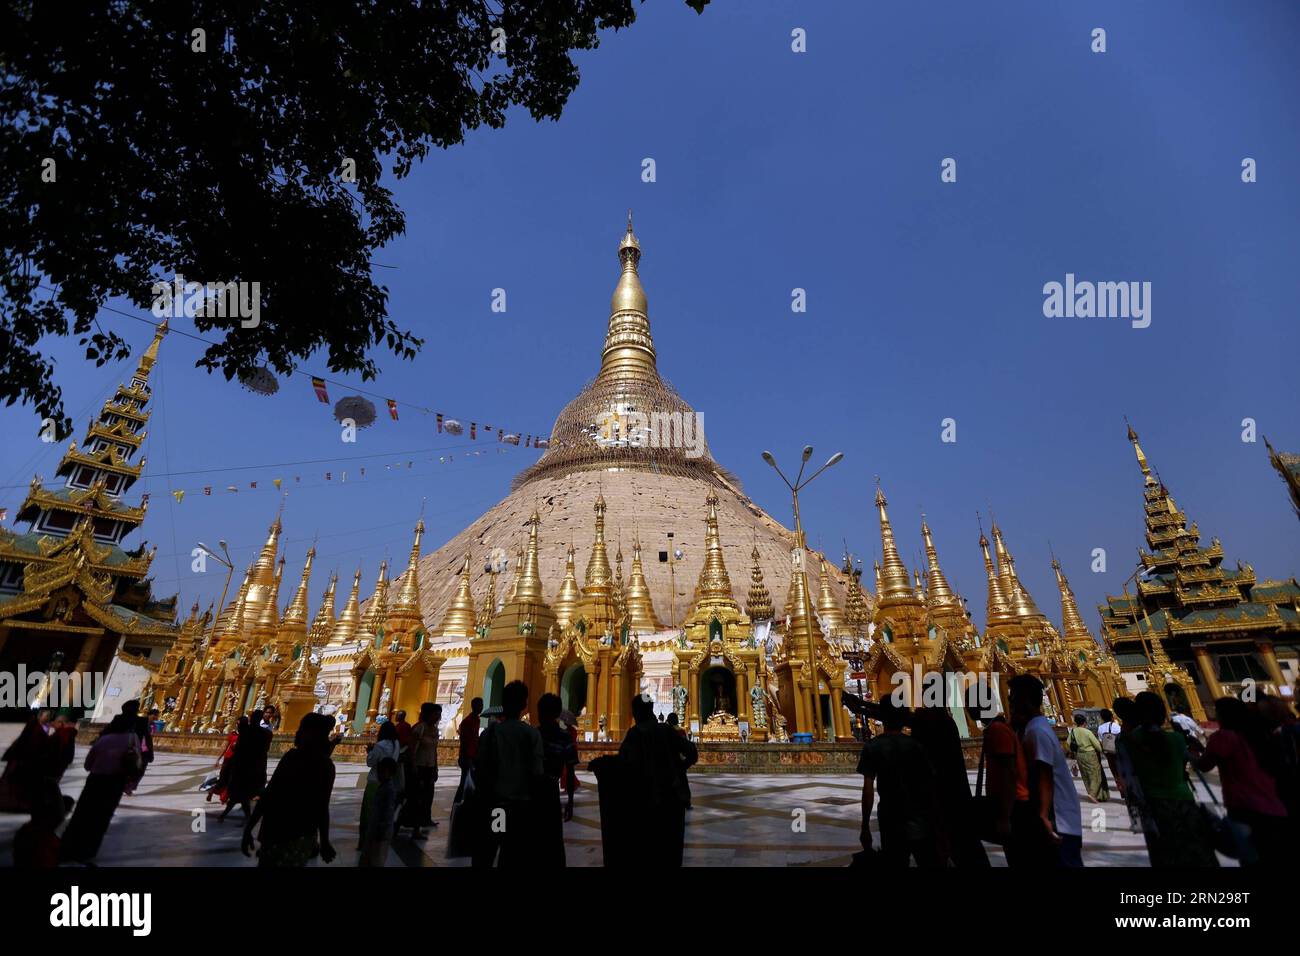 YANGON, Feb. 17, 2015 -- People visit the Shwedagon pagoda in Yangon, Myanmar, Feb. 17, 2015. Shwedagon Pagoda is a repository of the best of Myanmar s heritages -- architecture, sculpture and arts. It consists of hundreds of colorful temples, stupas and statues that reflect architectural styles spanning almost 2,500 years. ) MYANMAR-YANGON-SHWEDAGON PAGODA UxAung PUBLICATIONxNOTxINxCHN   Yangon Feb 17 2015 Celebrities Visit The Shwedagon Pagoda in Yangon Myanmar Feb 17 2015 Shwedagon Pagoda IS a repository of The Best of Myanmar S heritage Architecture Sculpture and Arts IT consists of hundre Stock Photo